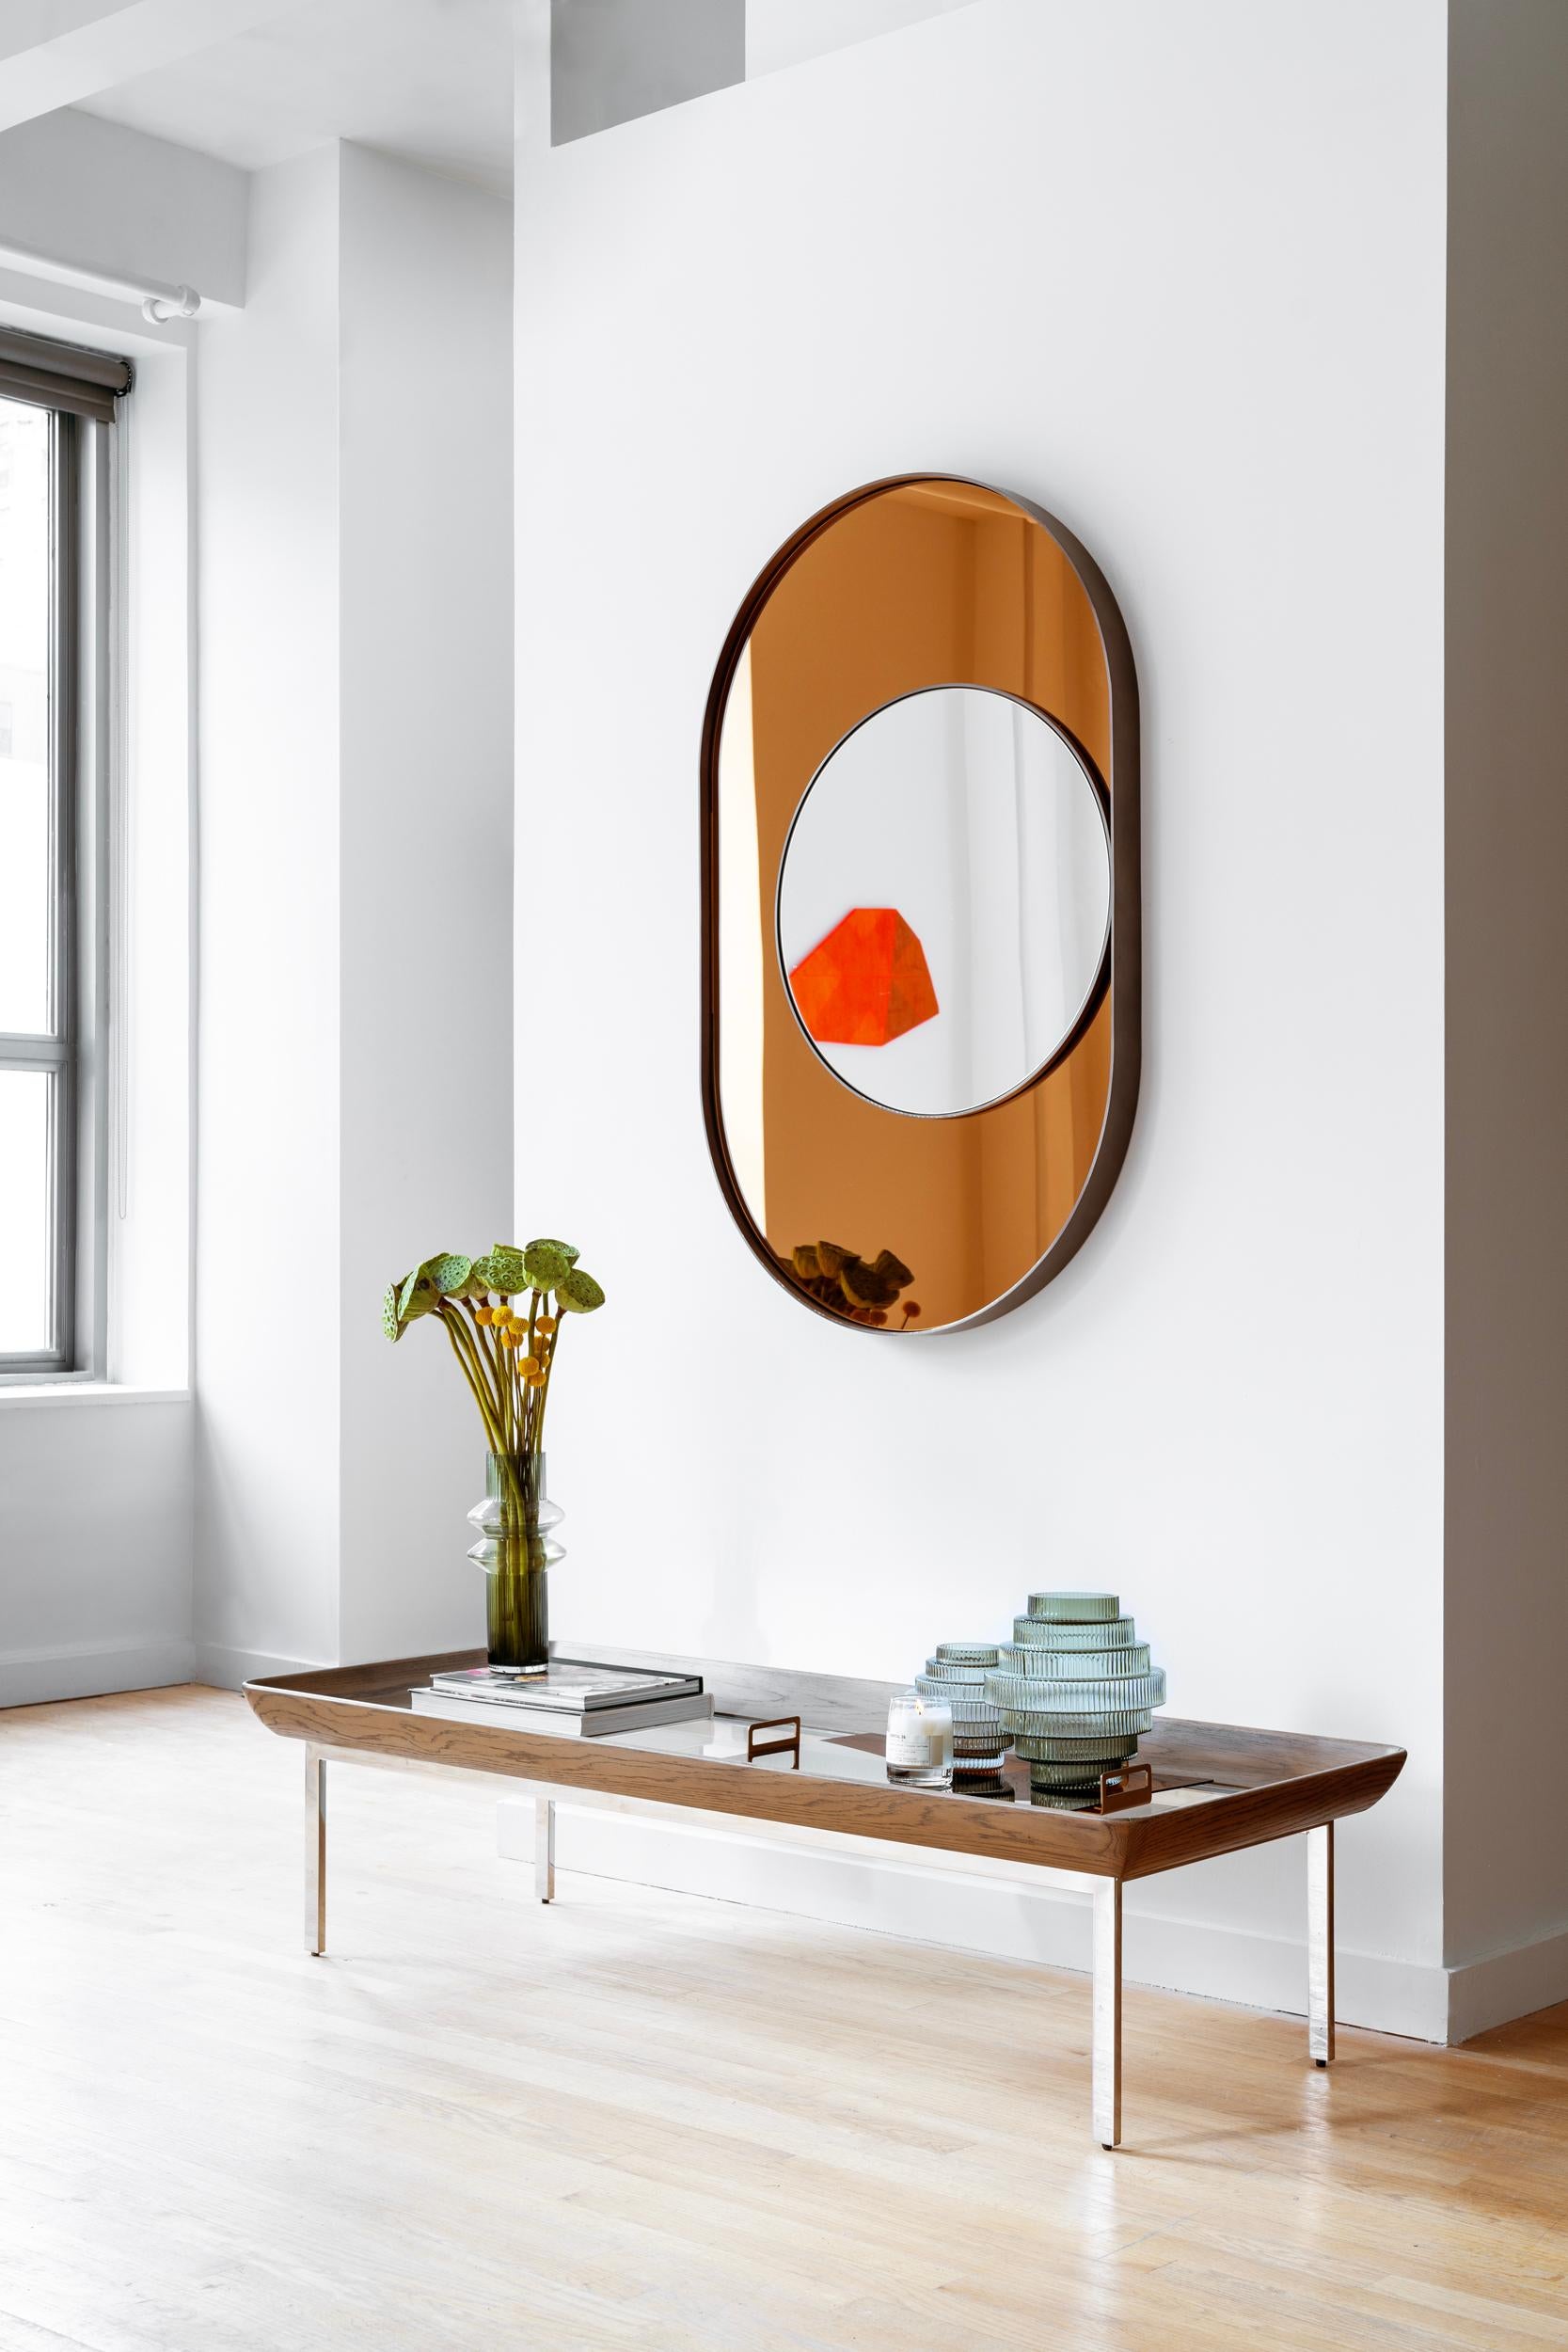 No. AC-008

The inspiration behind the Ovo Mirror Collection (Arc, Ellipse, and Trapezoid mirrors) was conceived by Lauren's fascination with early light and space artists who often hid mirrors within their work to manipulate the